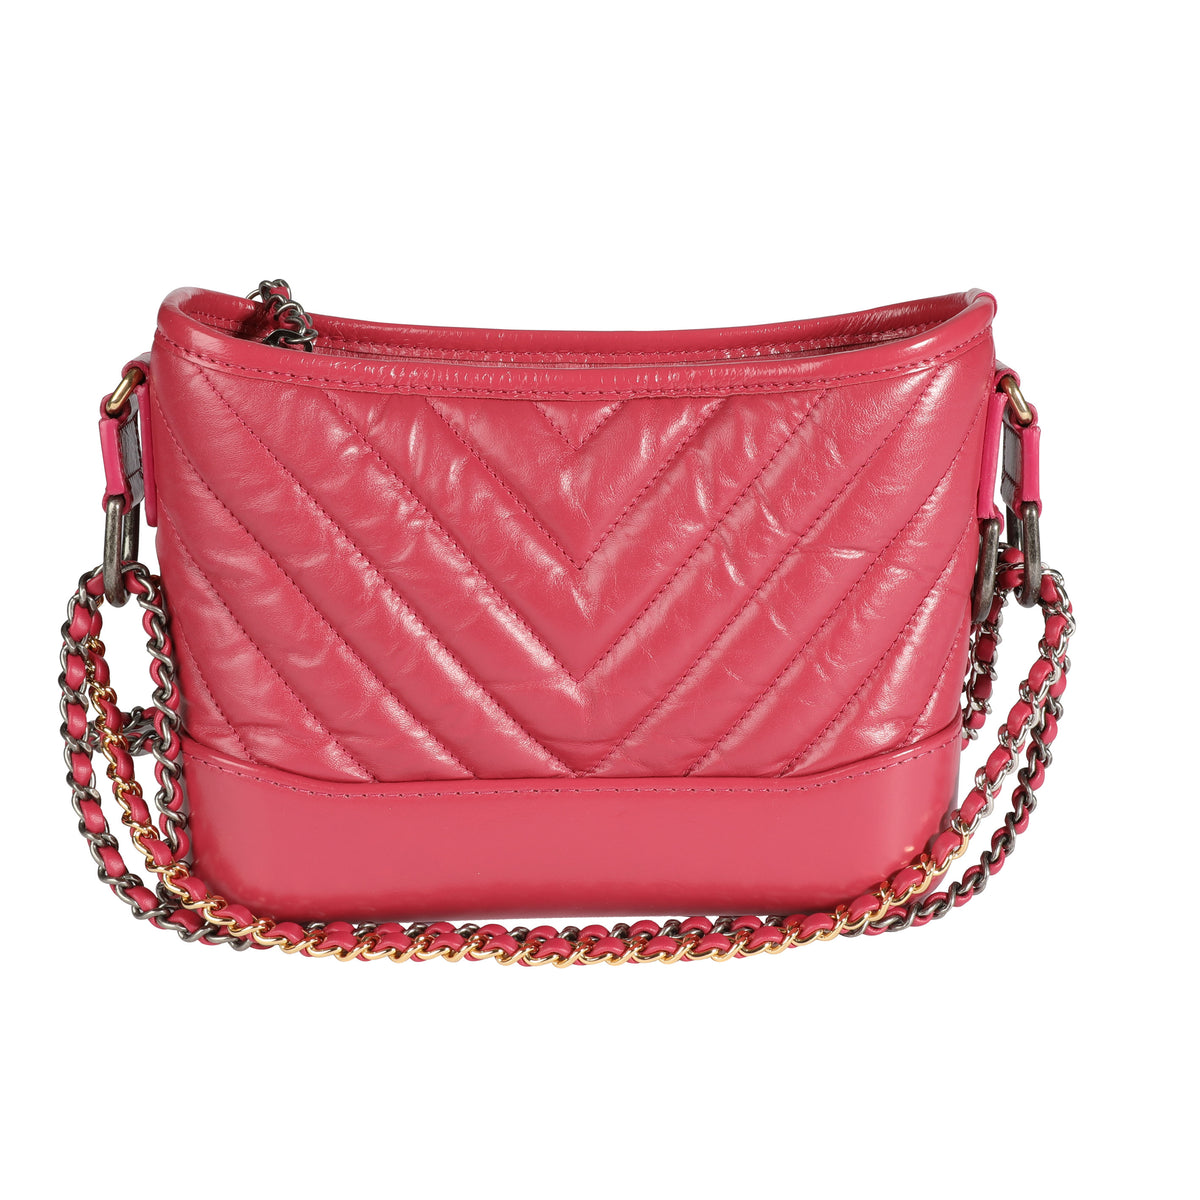 CHANEL Metallic Aged Calfskin Chevron Quilted Small Gabrielle Hobo